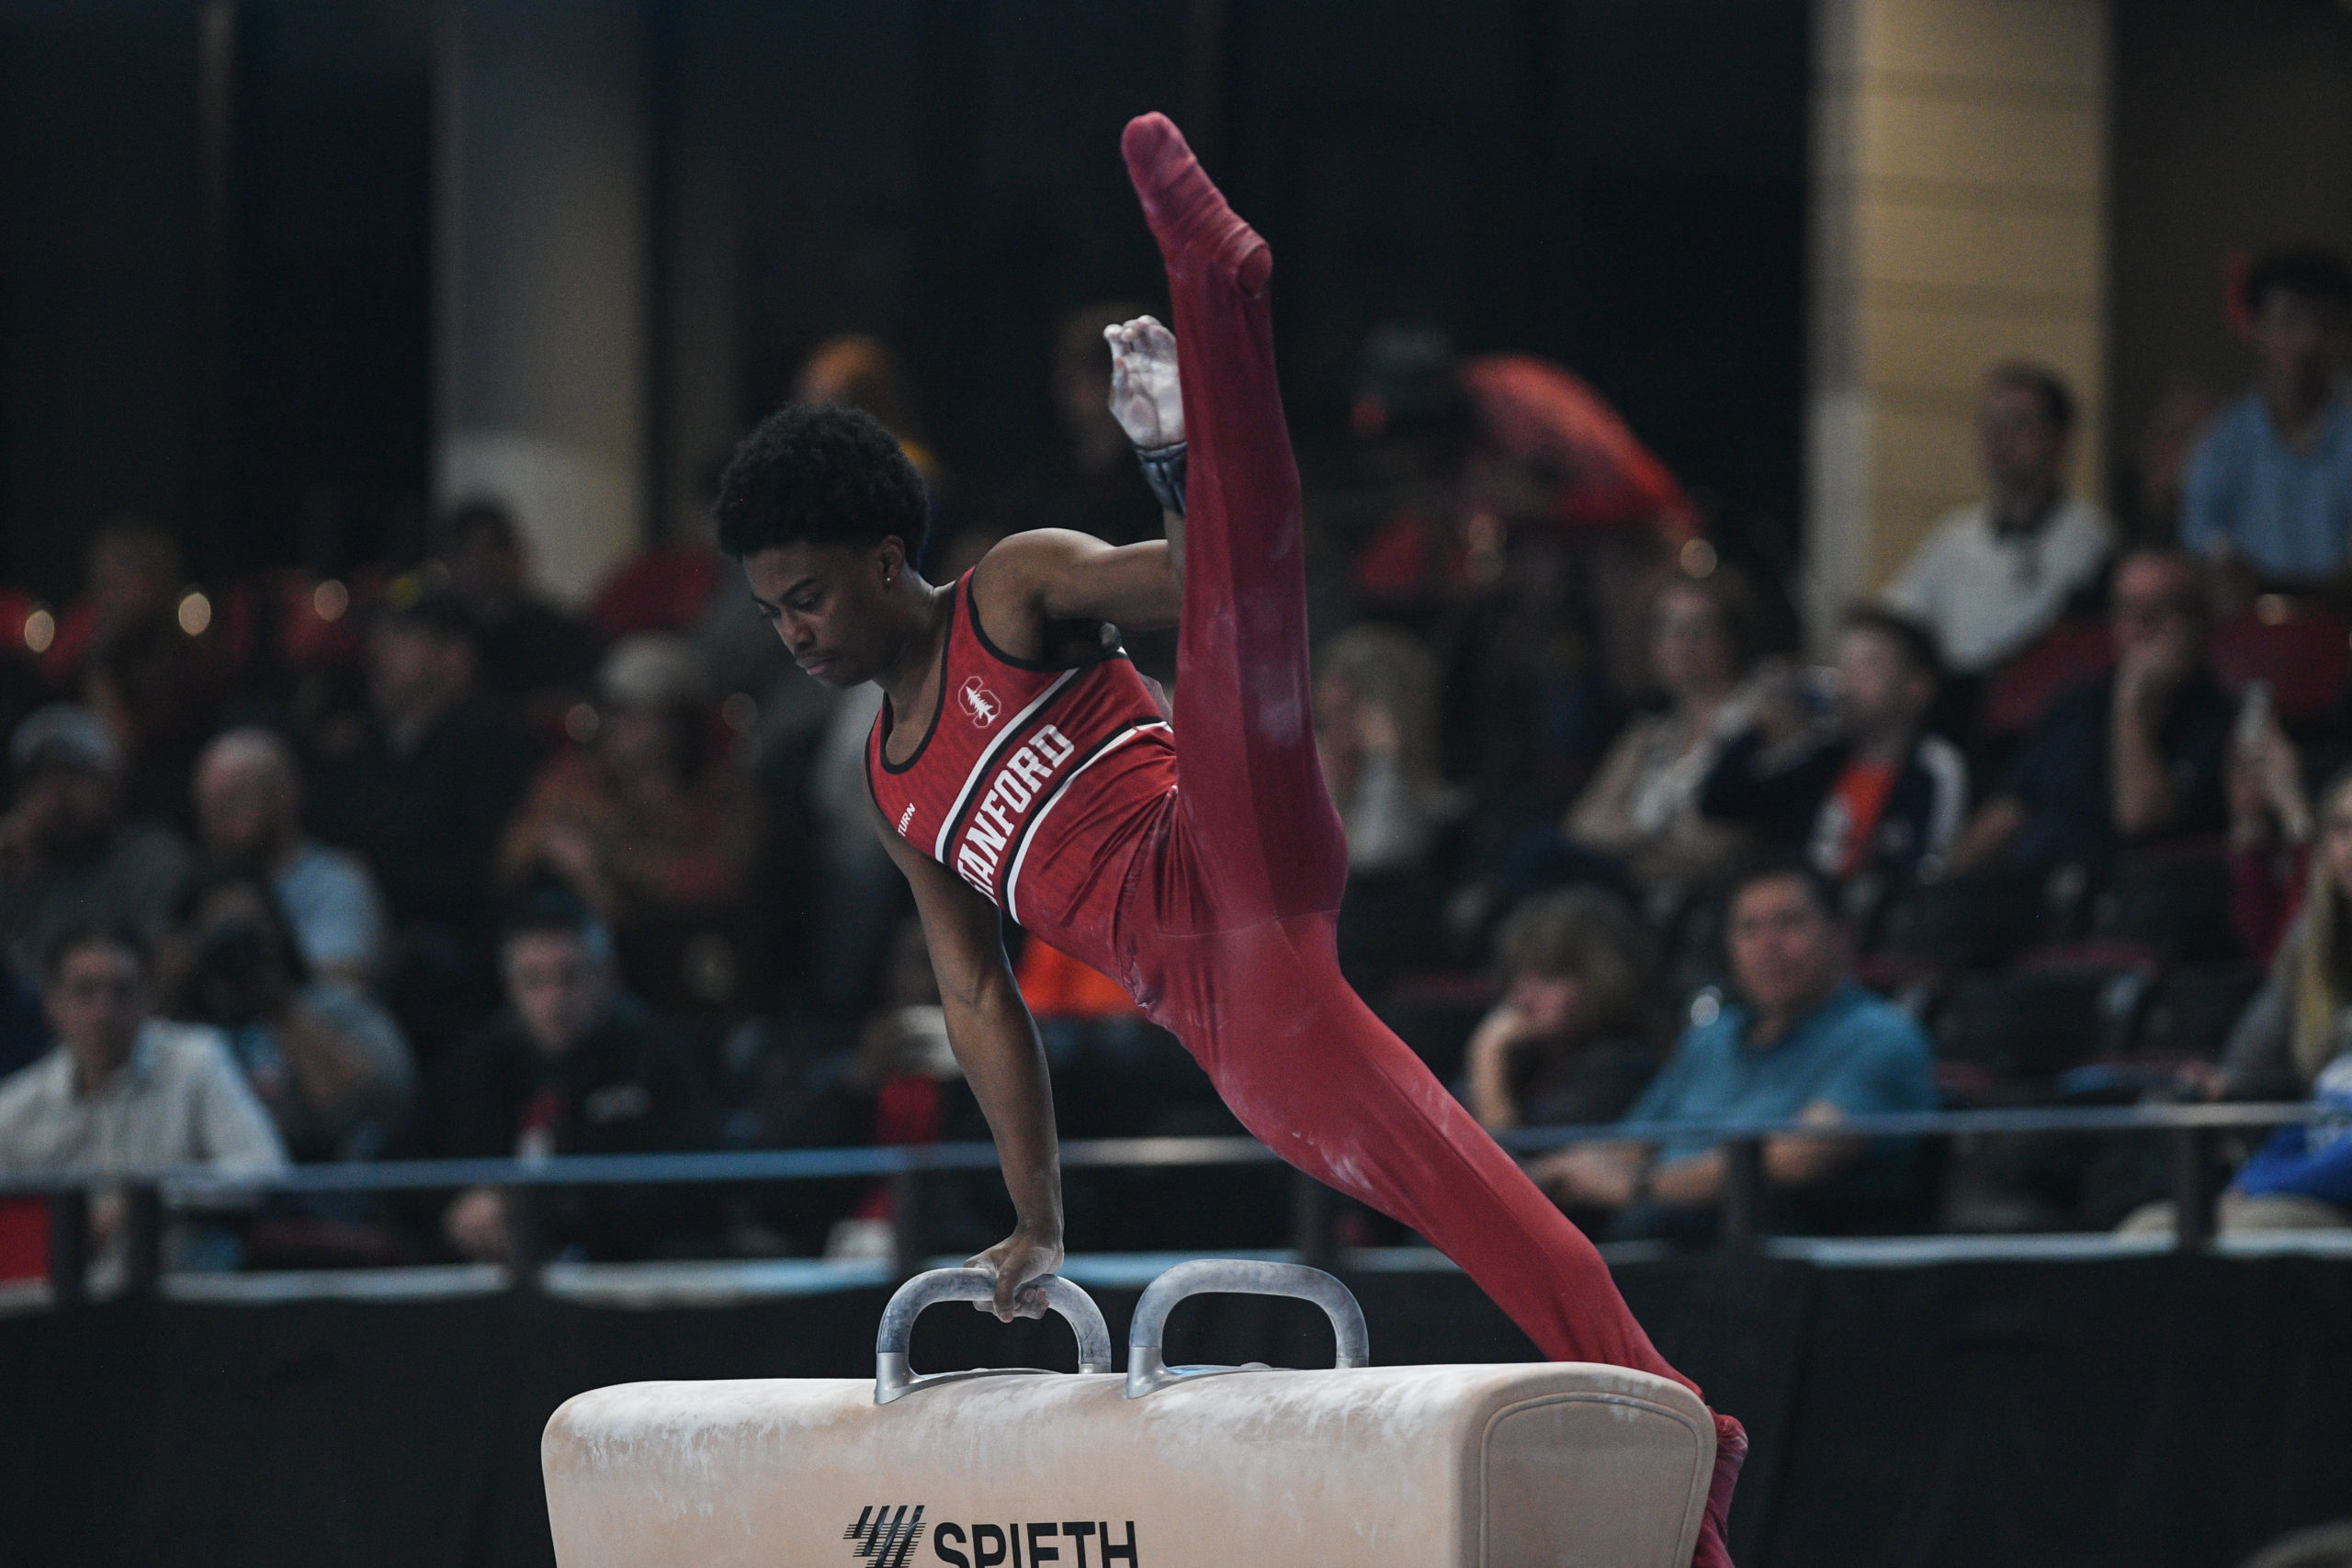 Stanford's Khoi Young performs a scissor element on pommel horse during Day 2 of the 2023 Winter Cup.